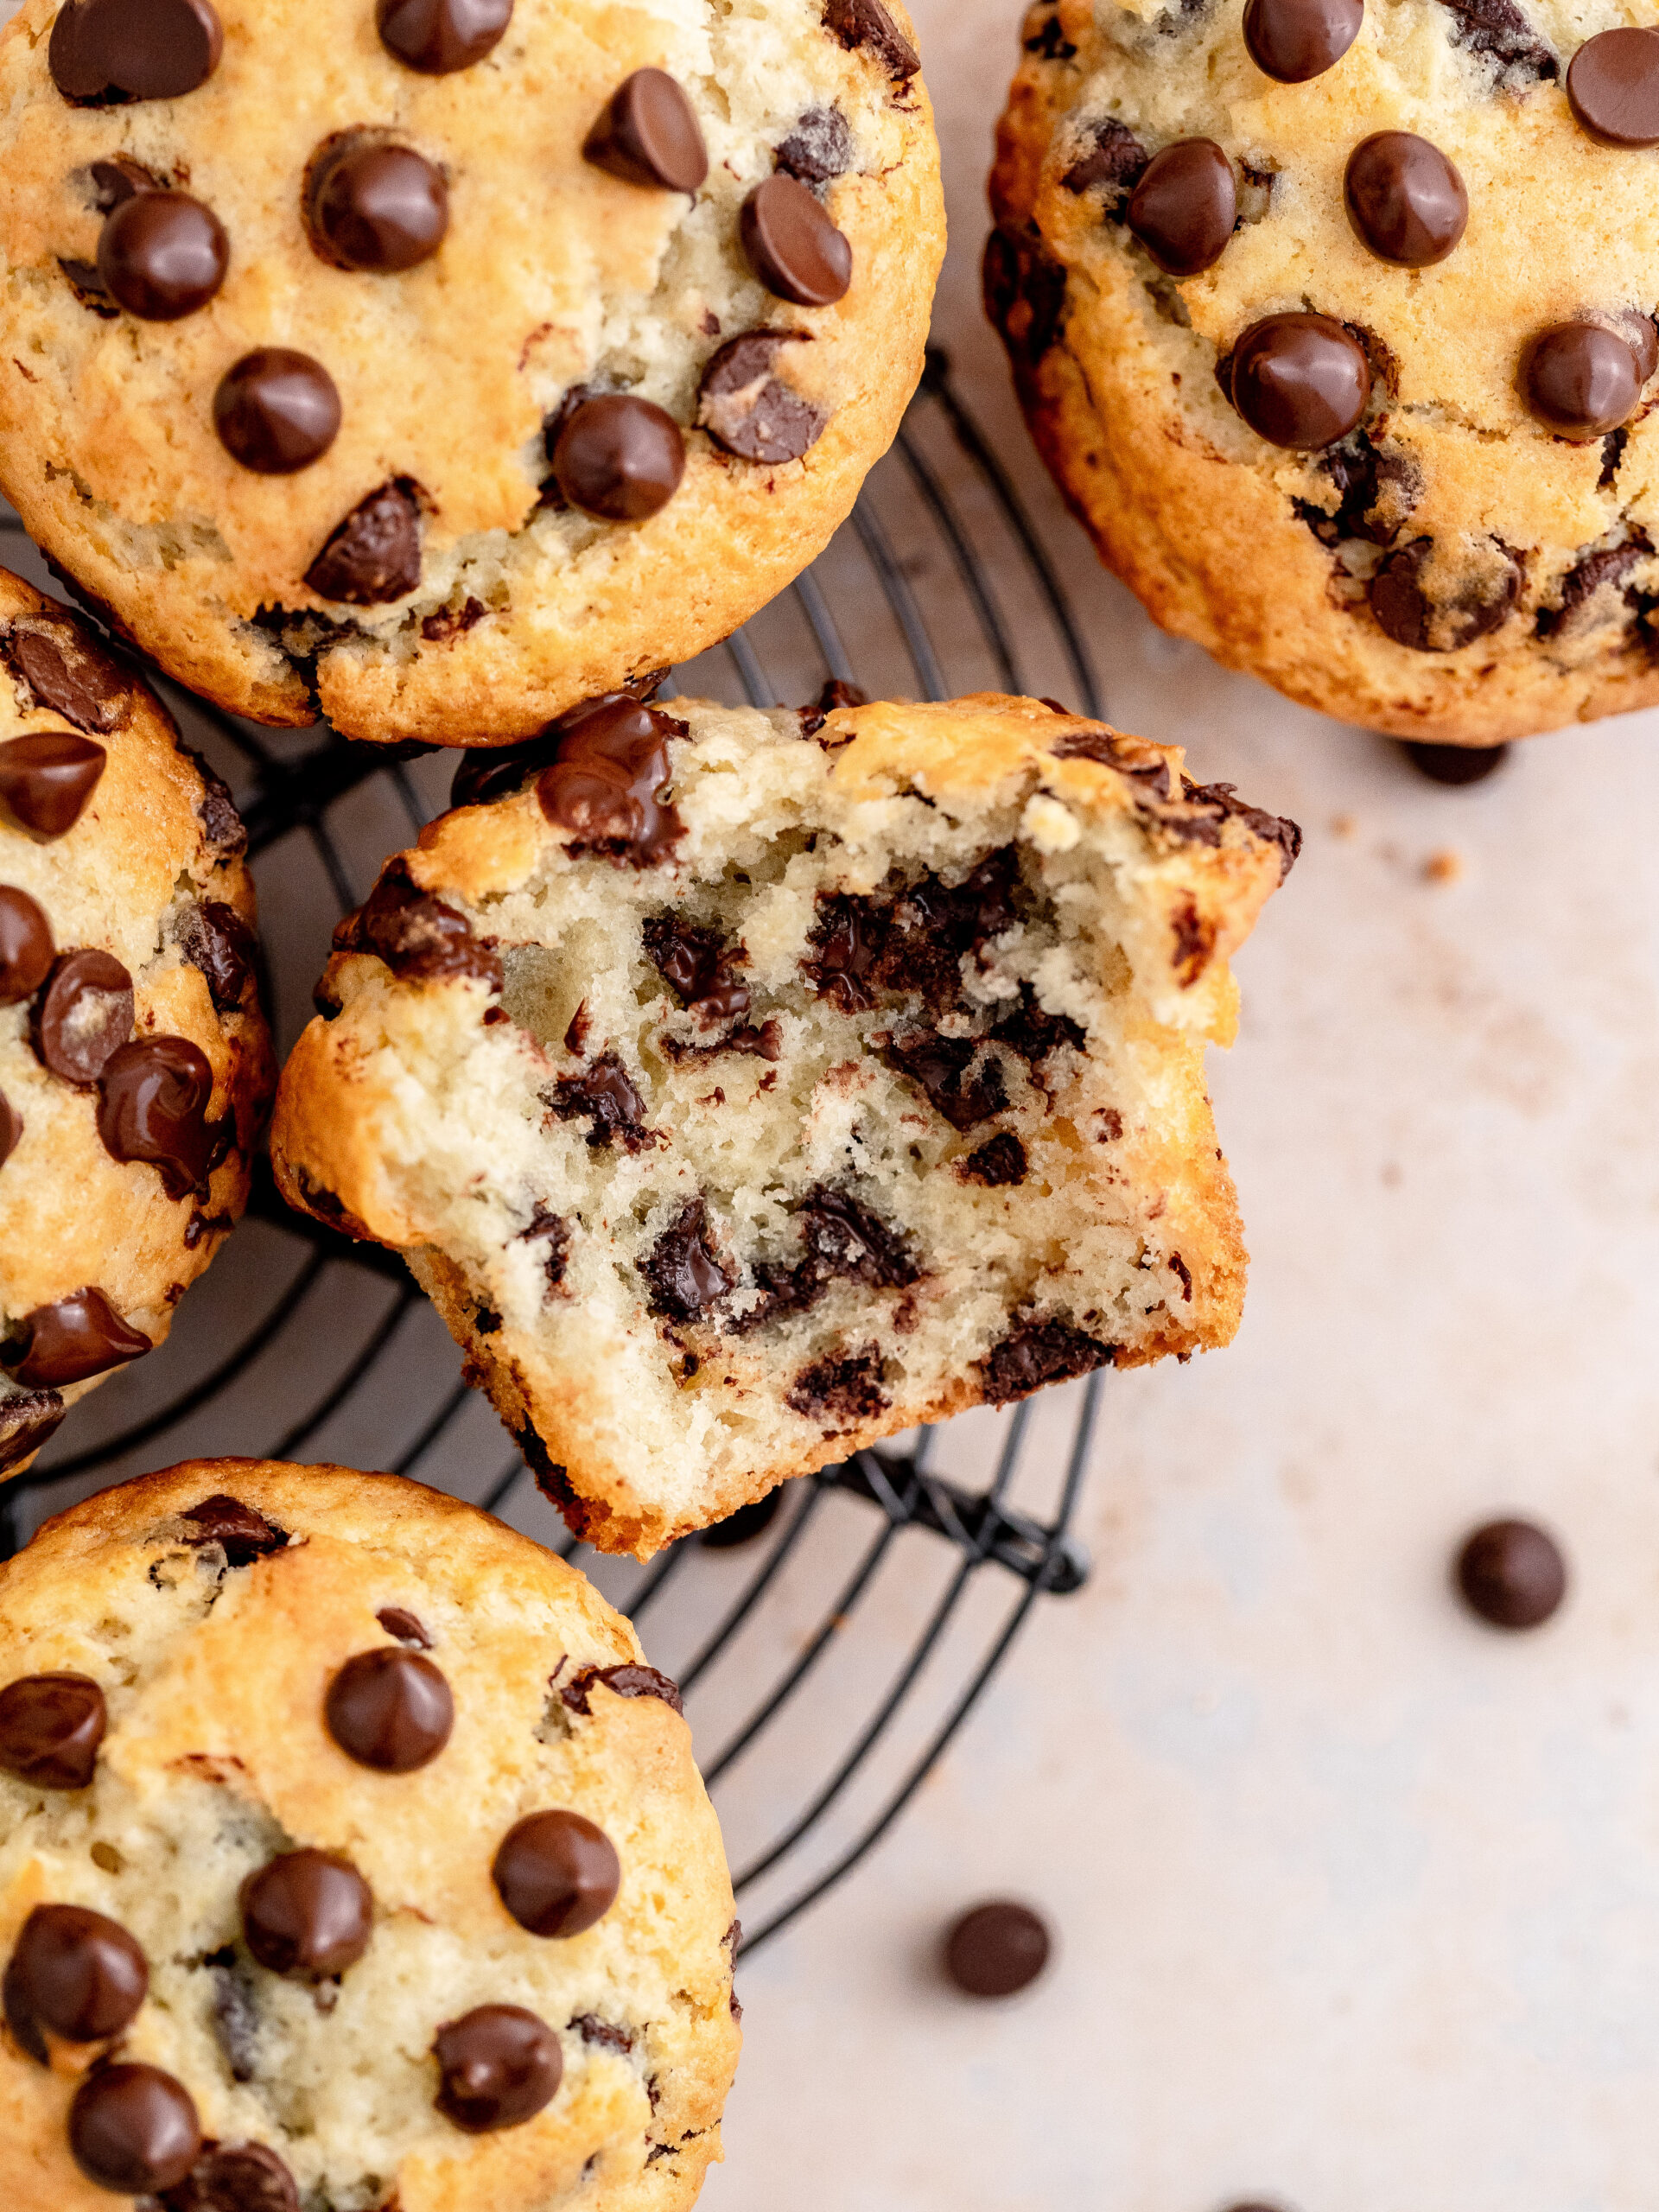 https://juliemarieeats.com/wp-content/uploads/2023/01/Bakery-Style-Chocolate-Chip-Muffins-12-scaled.jpg